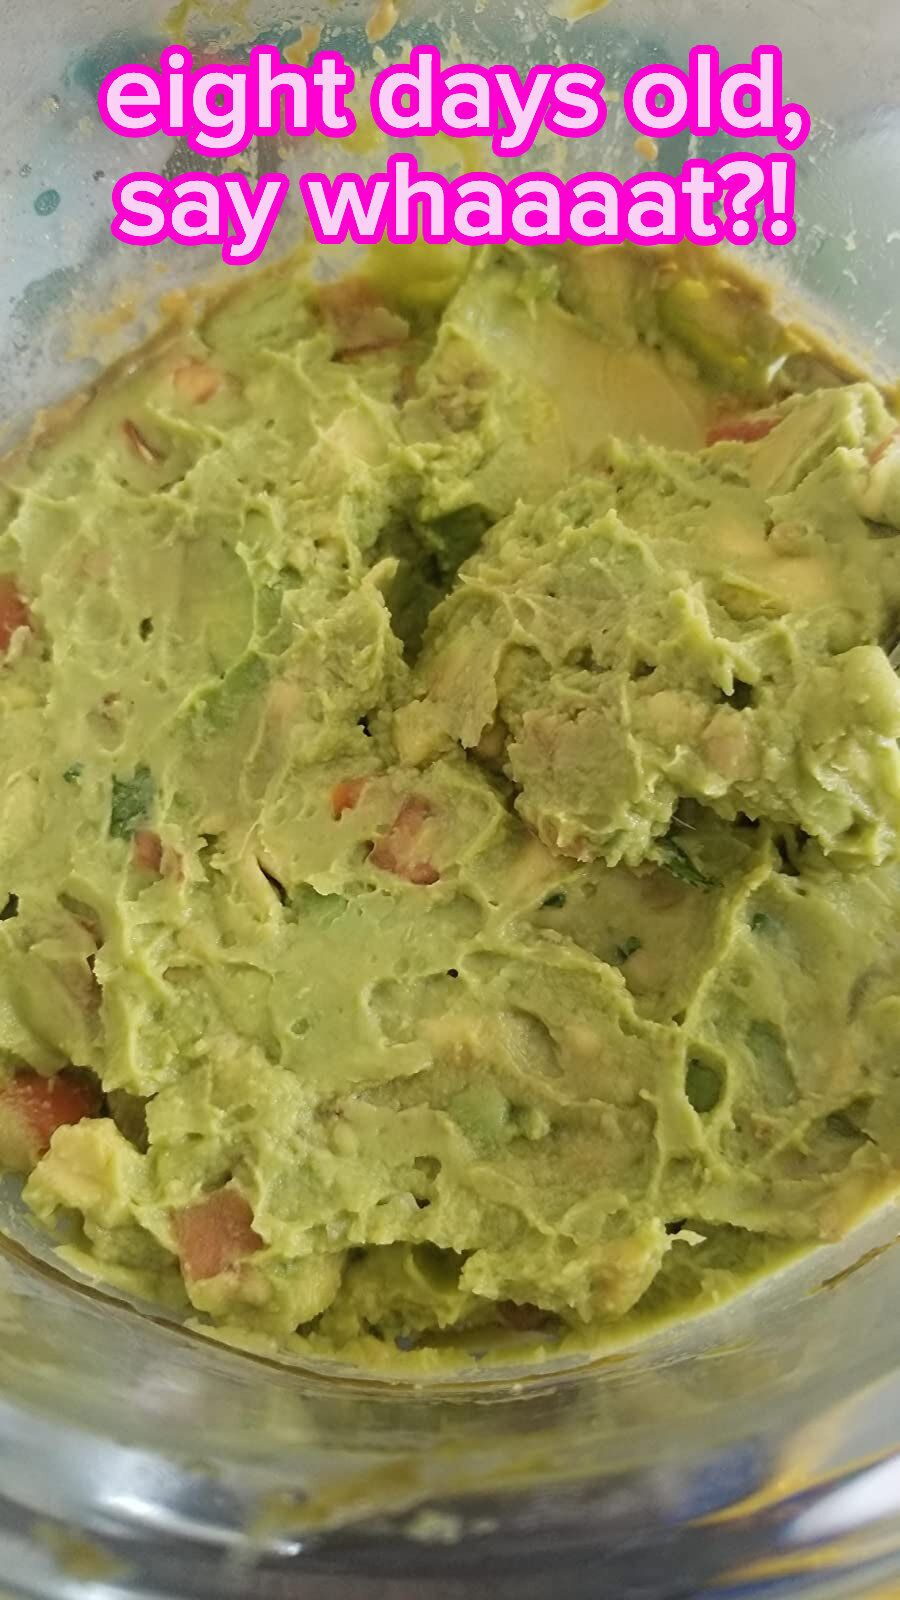 A genius Guac-Lock to keep air out and prevent browning